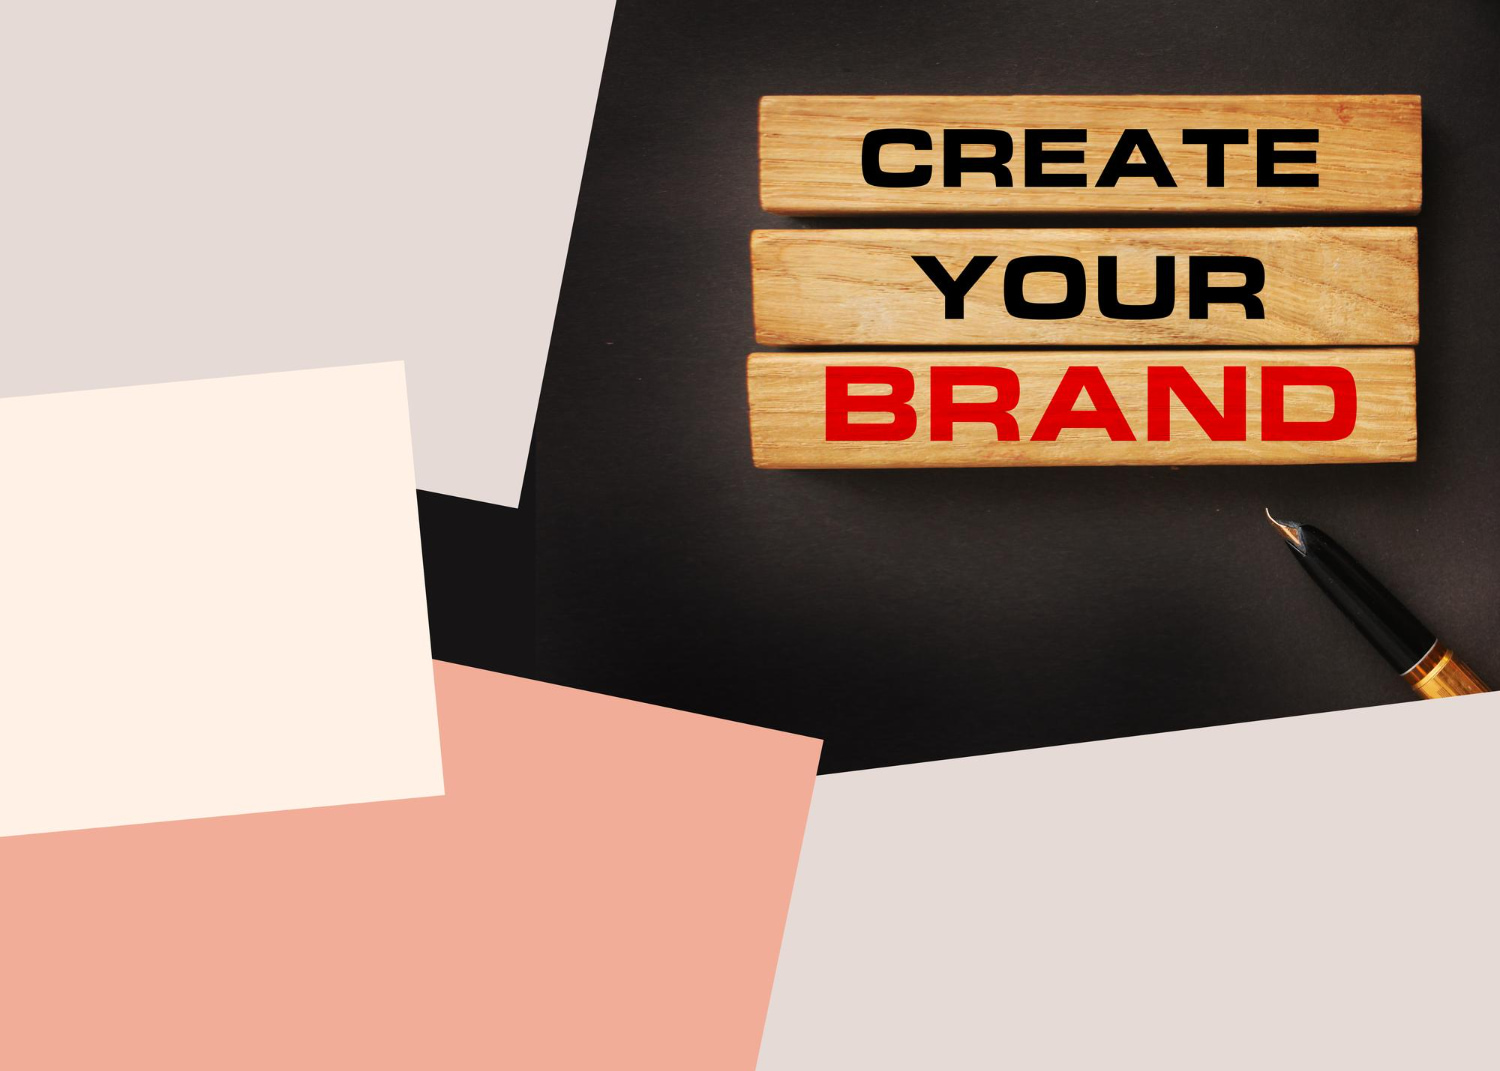 How to Build Your Brand and Grow Your Value